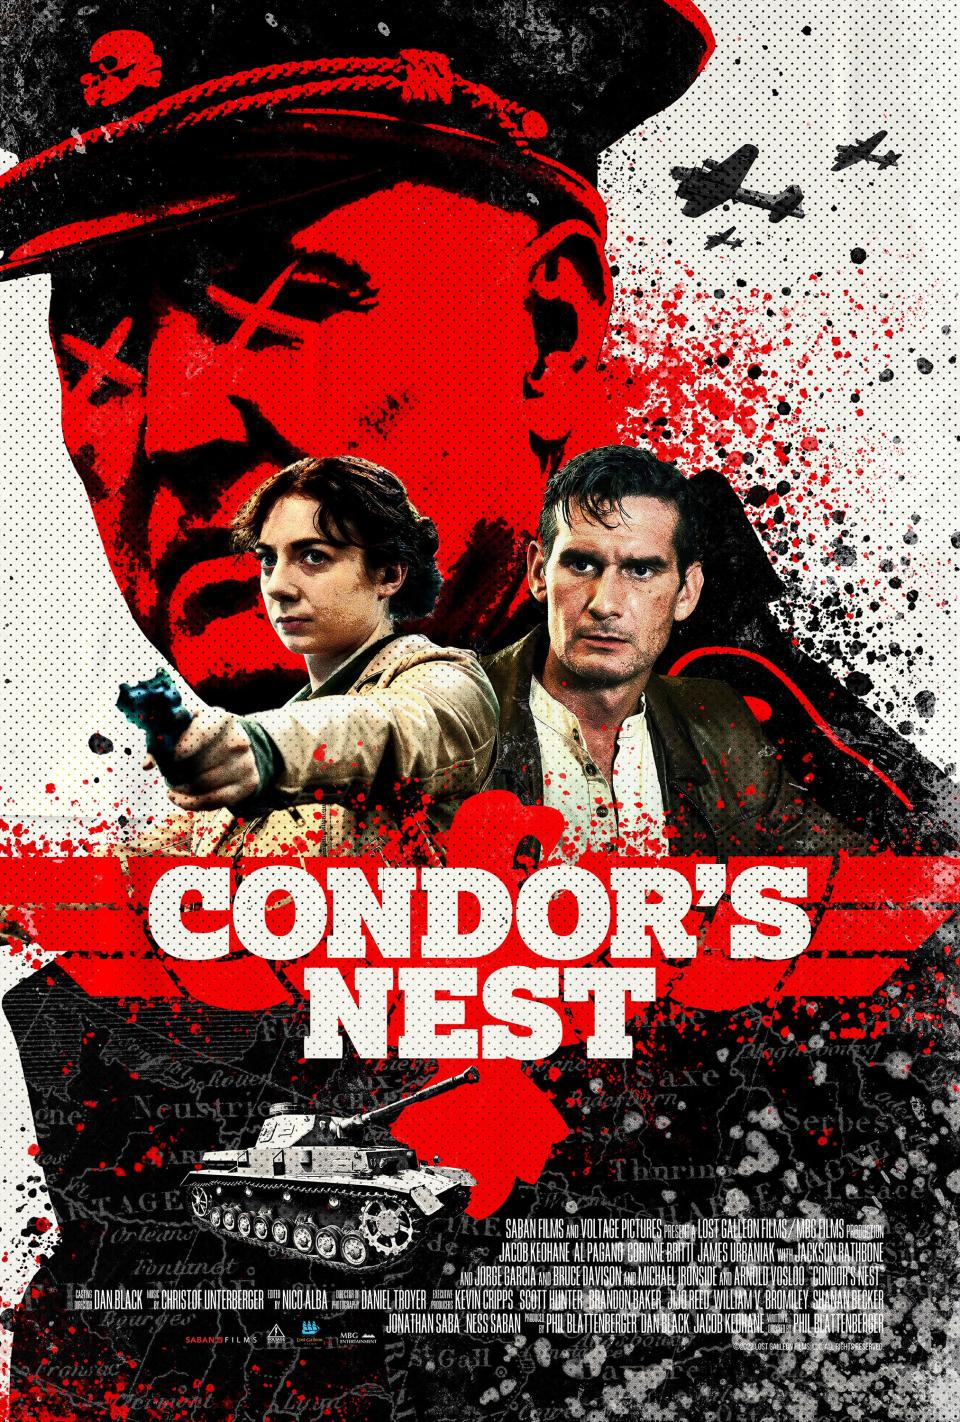 The movie poster for "Condor's Nest," which director Phil Blattenberger calls a "fun, '80s-style thriller."